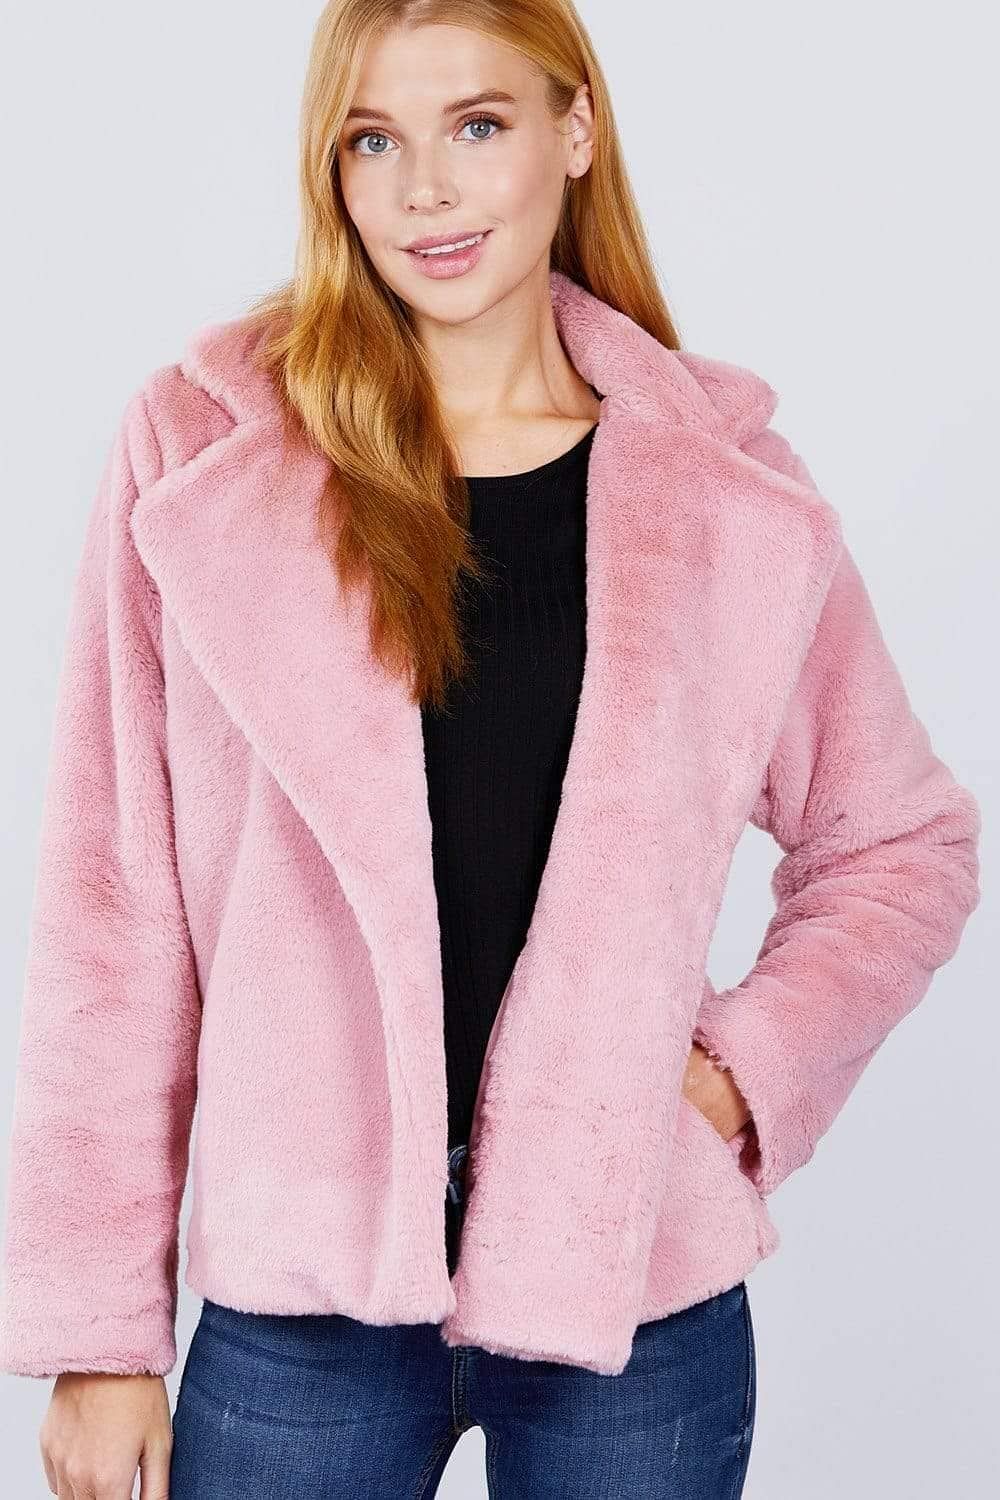 Pink Long Sleeve Faux Fur Jacket - Shopping Therapy S jackets